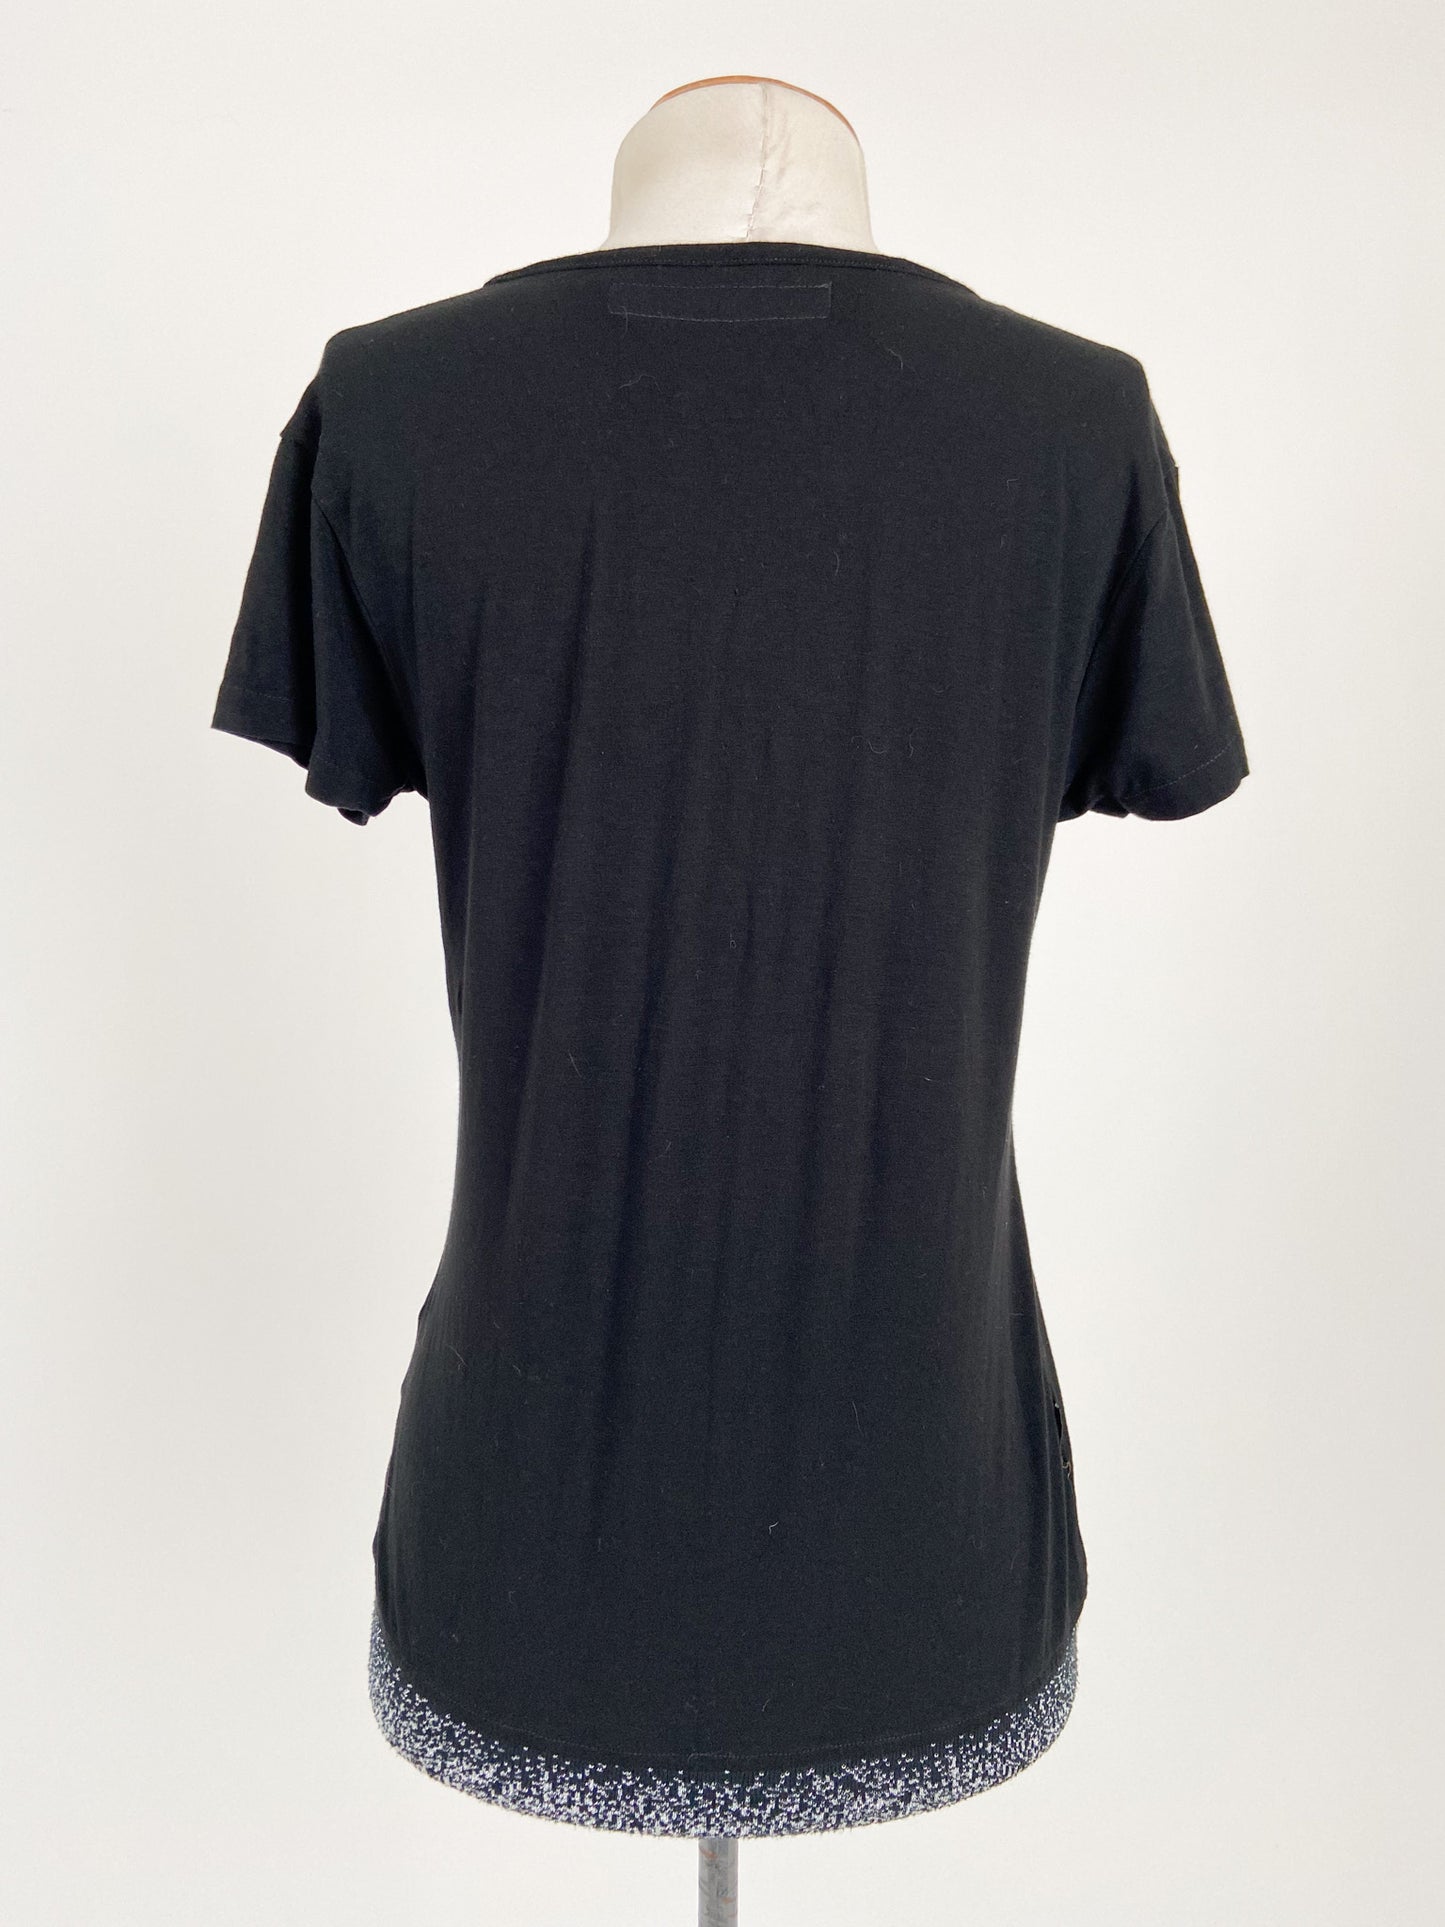 World | Black Casual Top | Size S